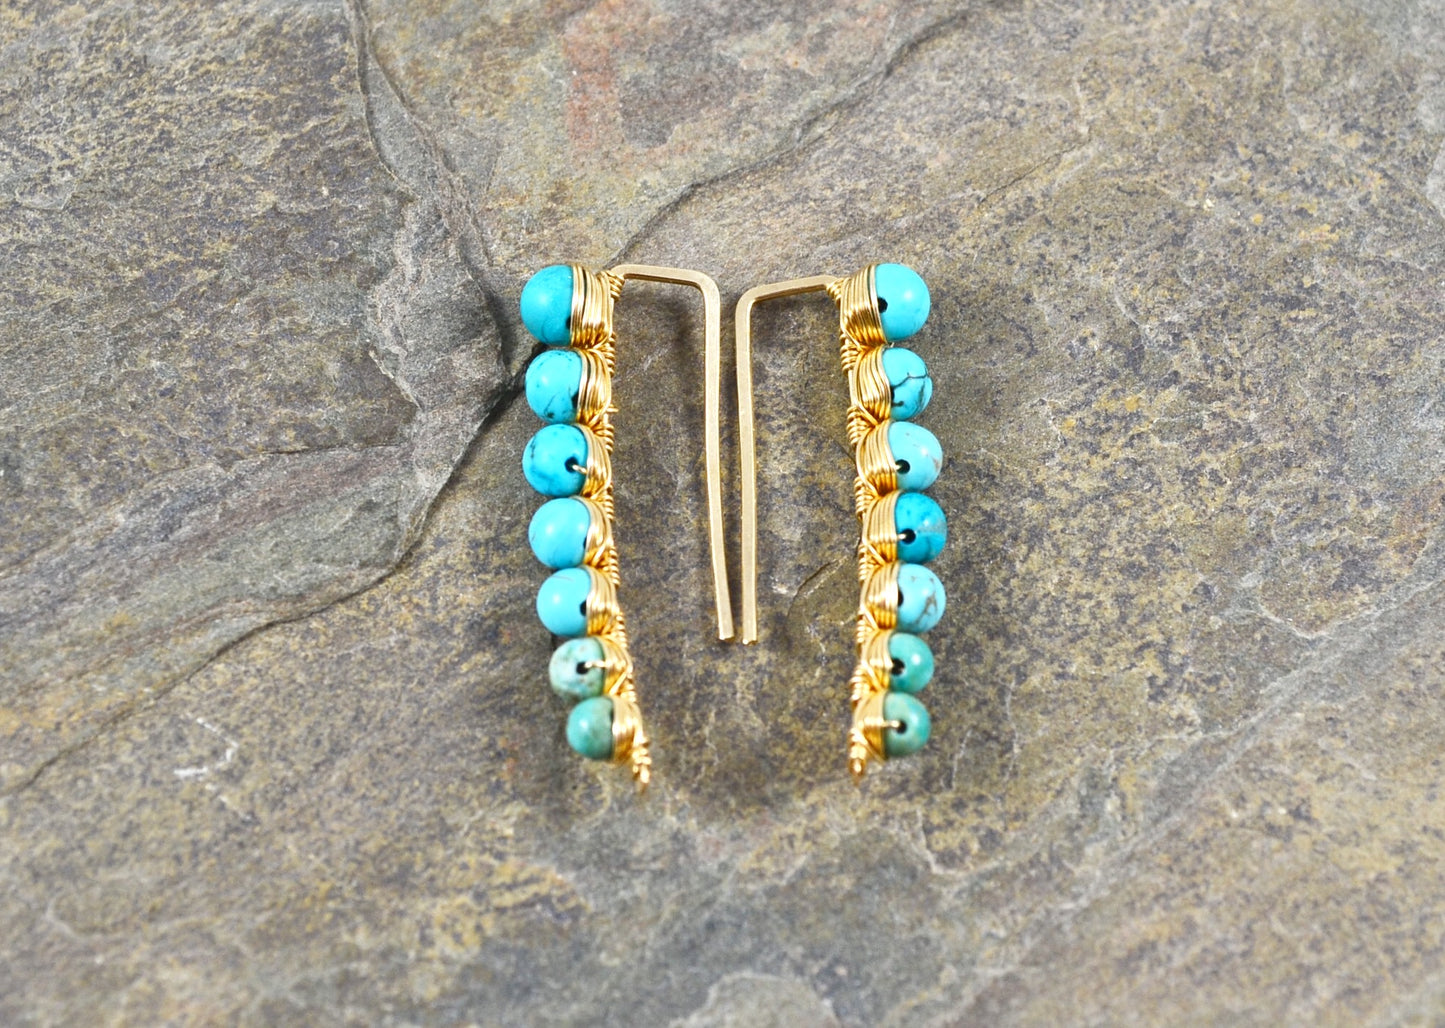 Turquoise Ear Climbers in Sterling Silver or 14k Gold Fill, December Birthstone gemstone earrings